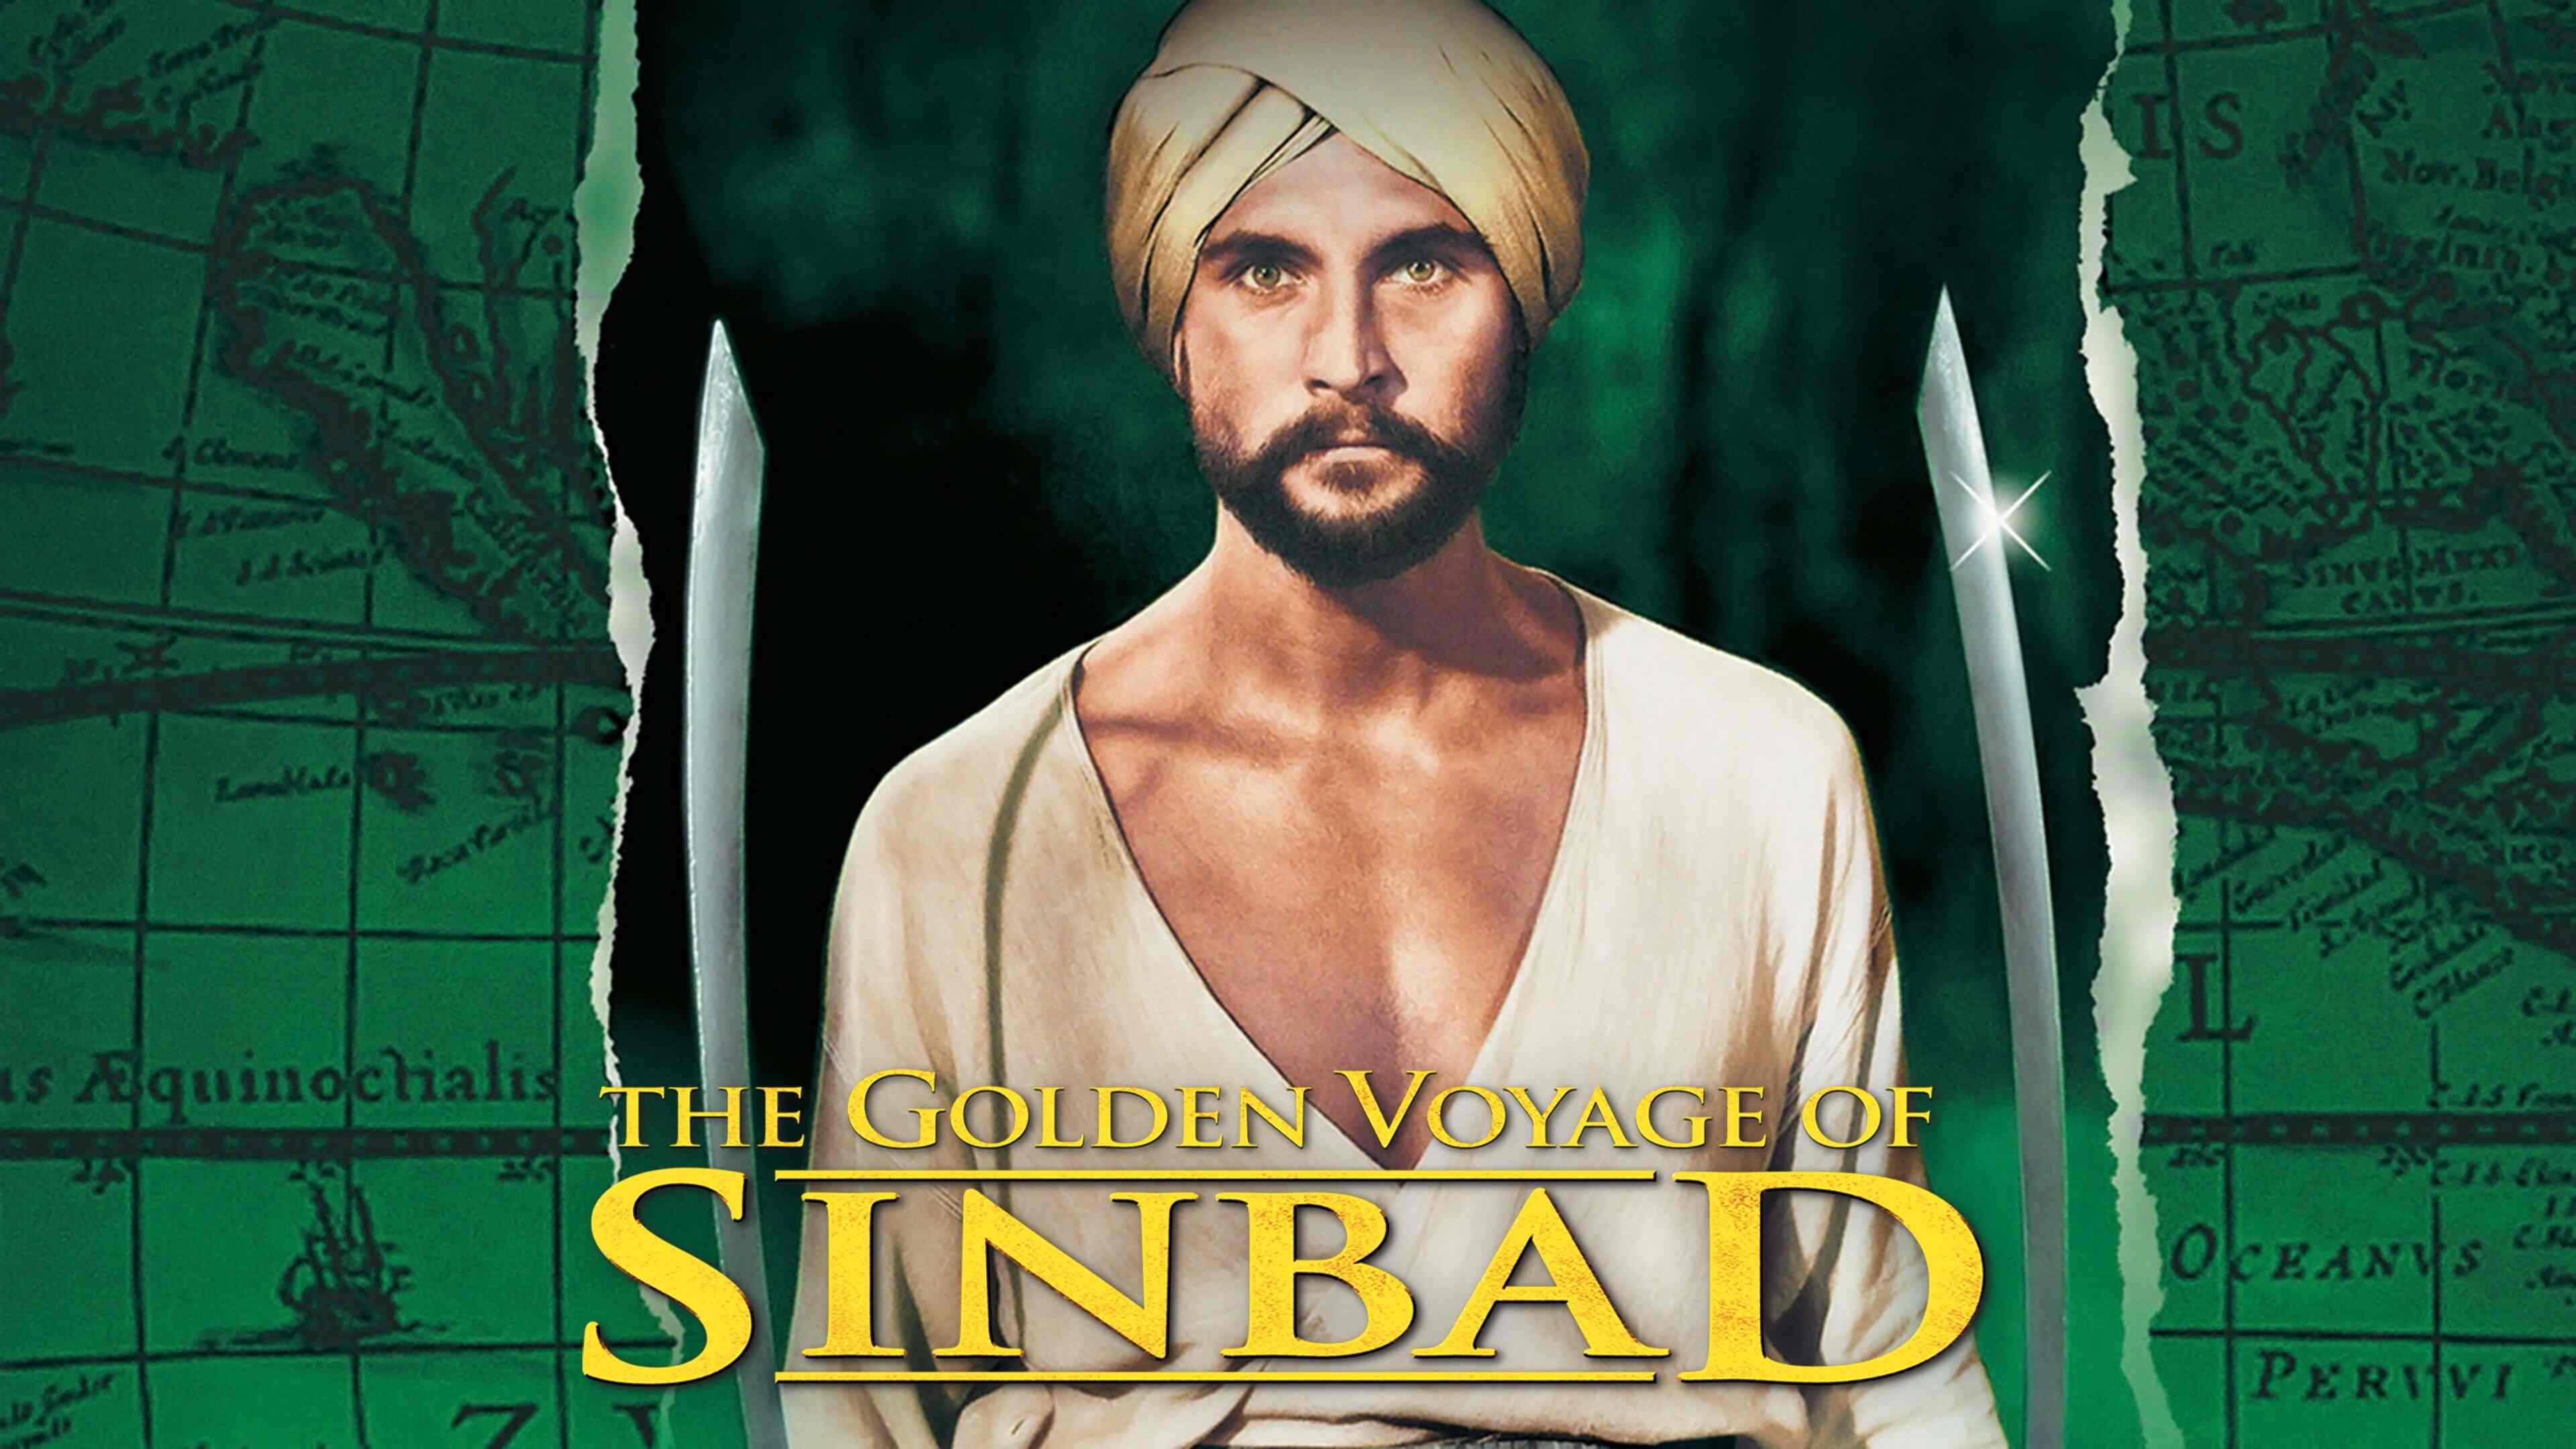 42-facts-about-the-movie-the-golden-voyage-of-sinbad